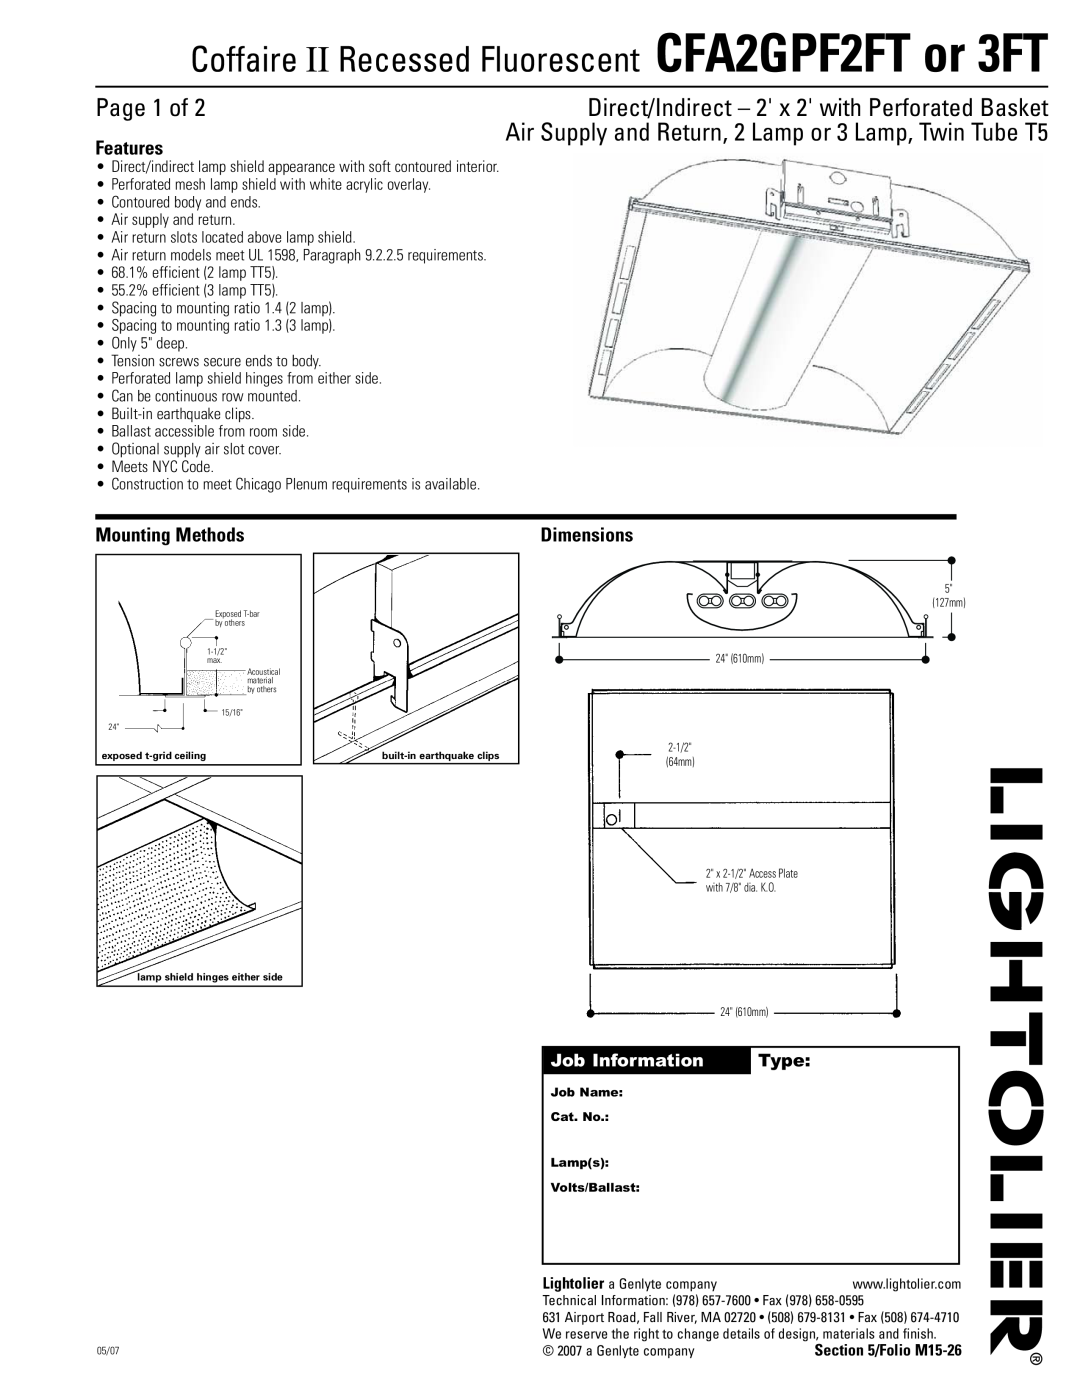 Lightolier CFA2GPF3FT, CFA2GPF2FT dimensions Page 1 of, Features, Mounting Methods, Dimensions, Job Information, Type 